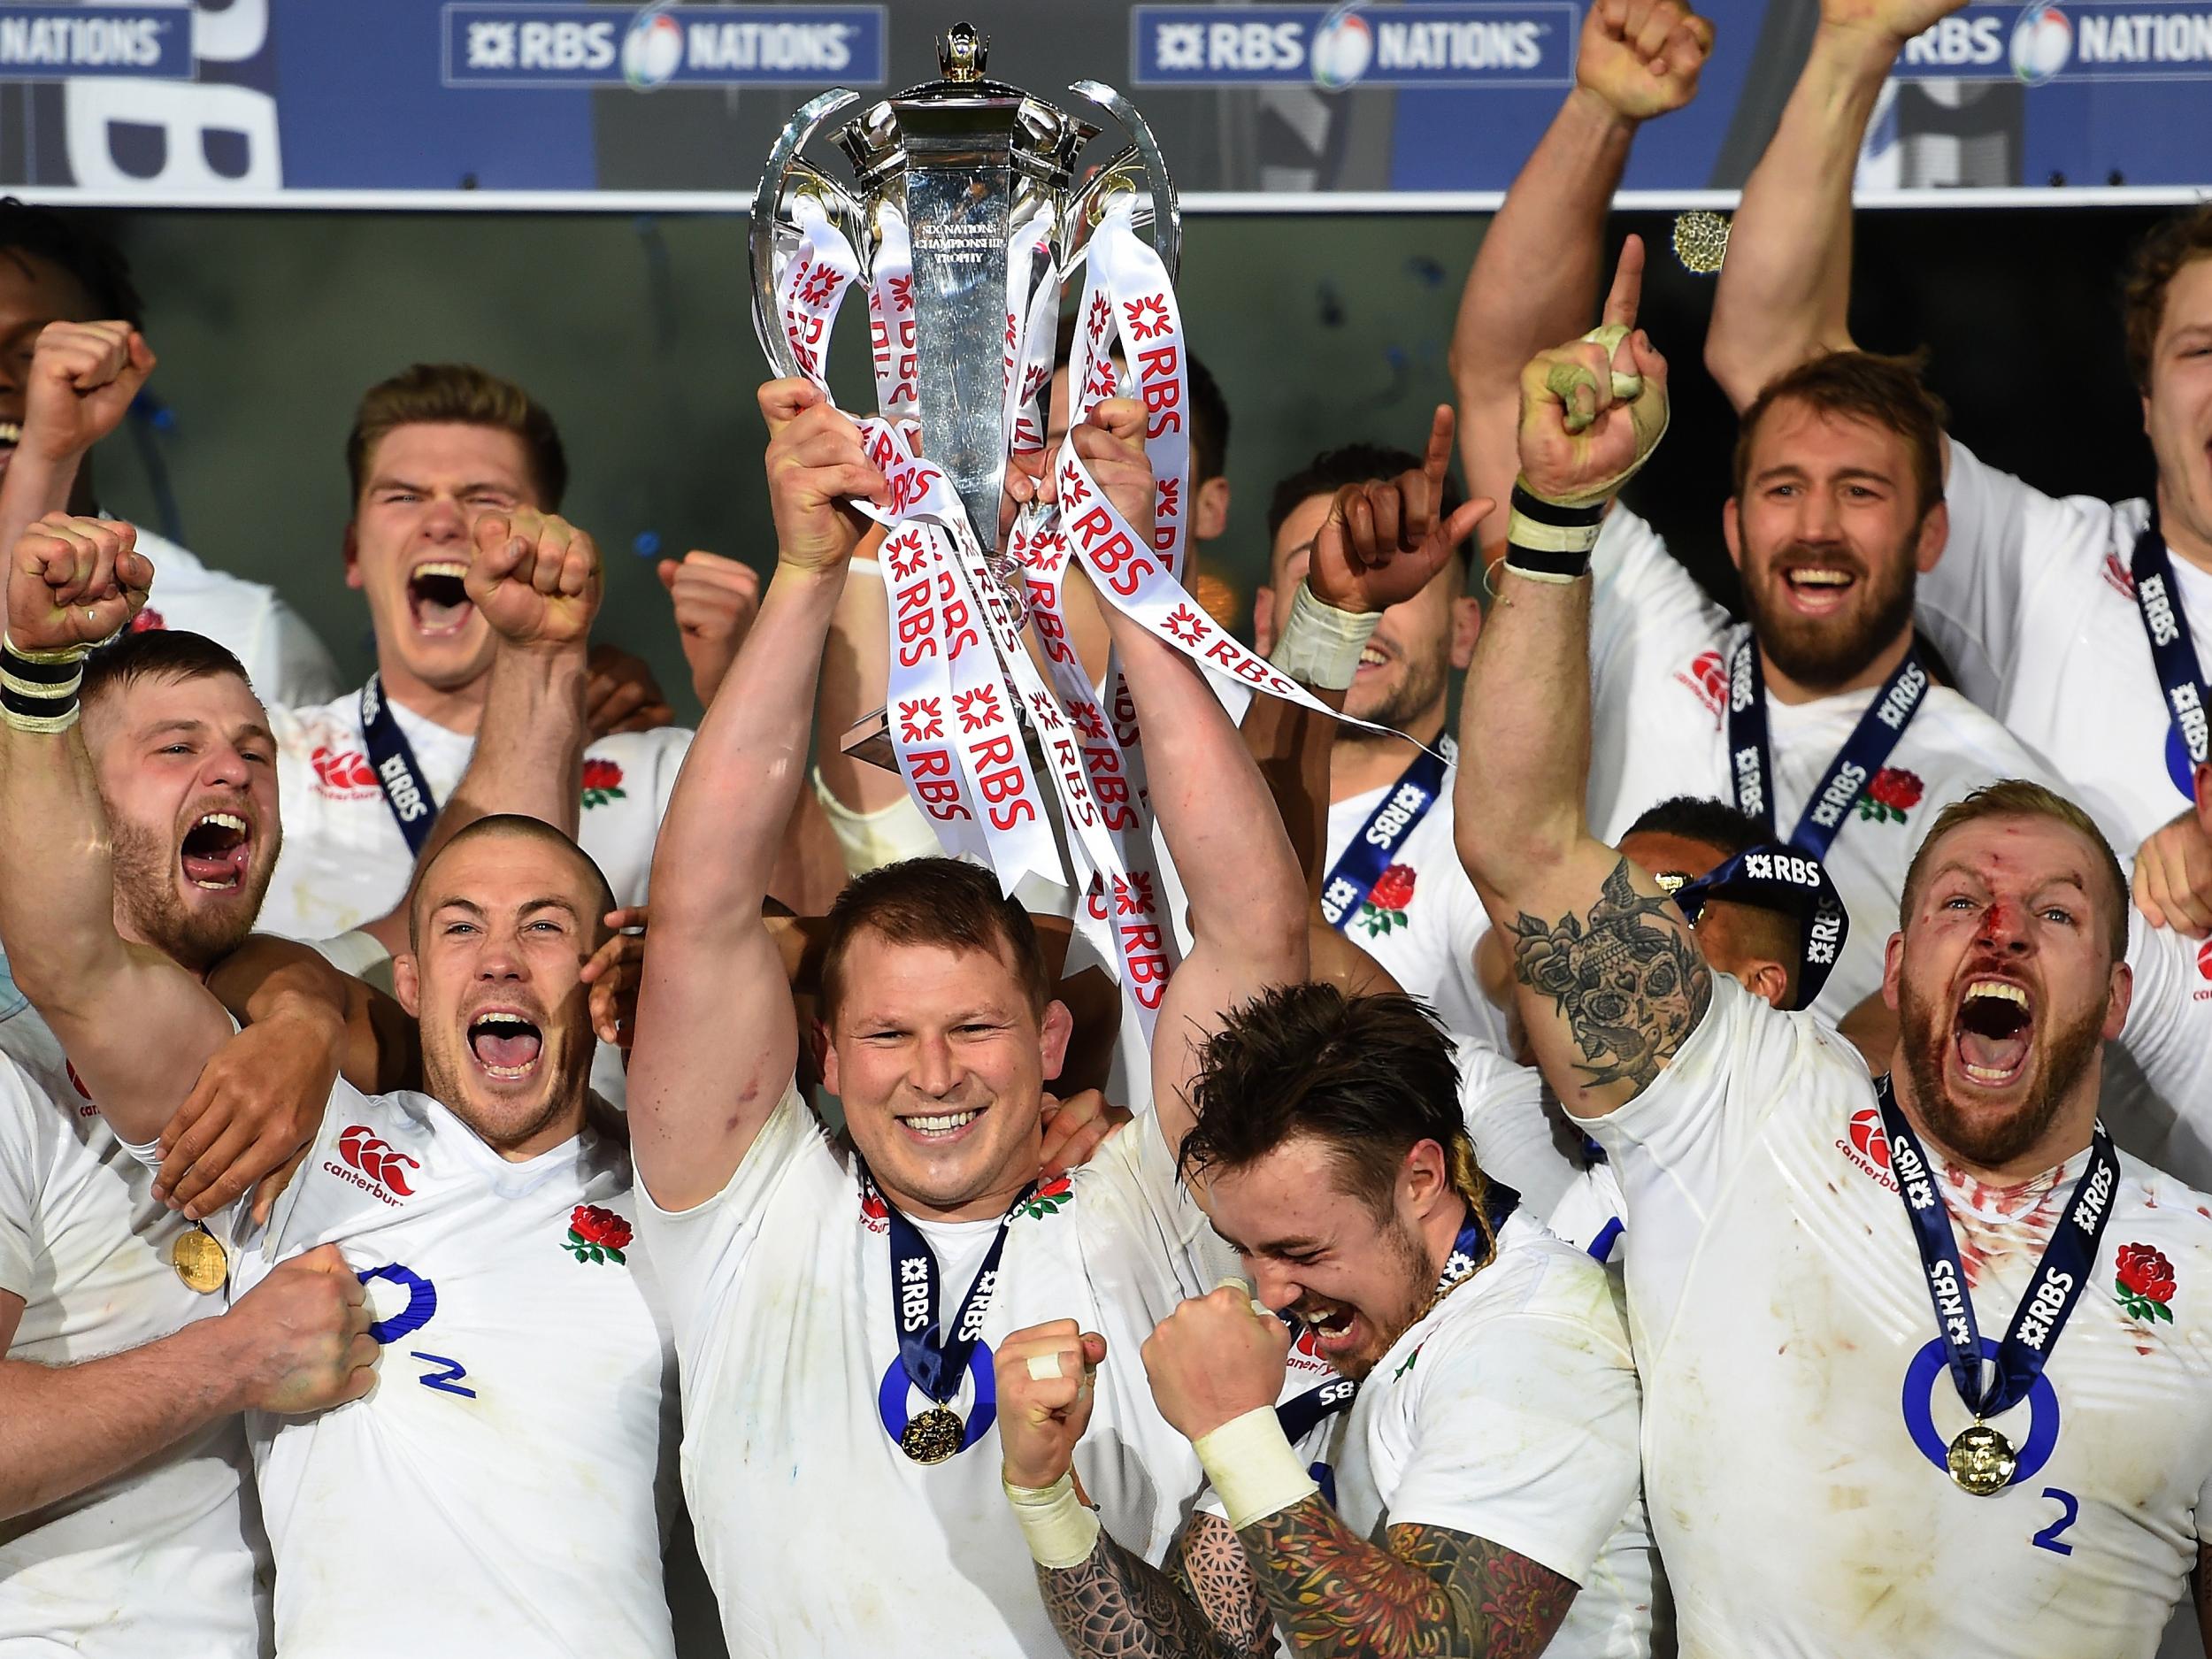 England are favourites to win the trophy but will find a Grand Slam more difficult this year